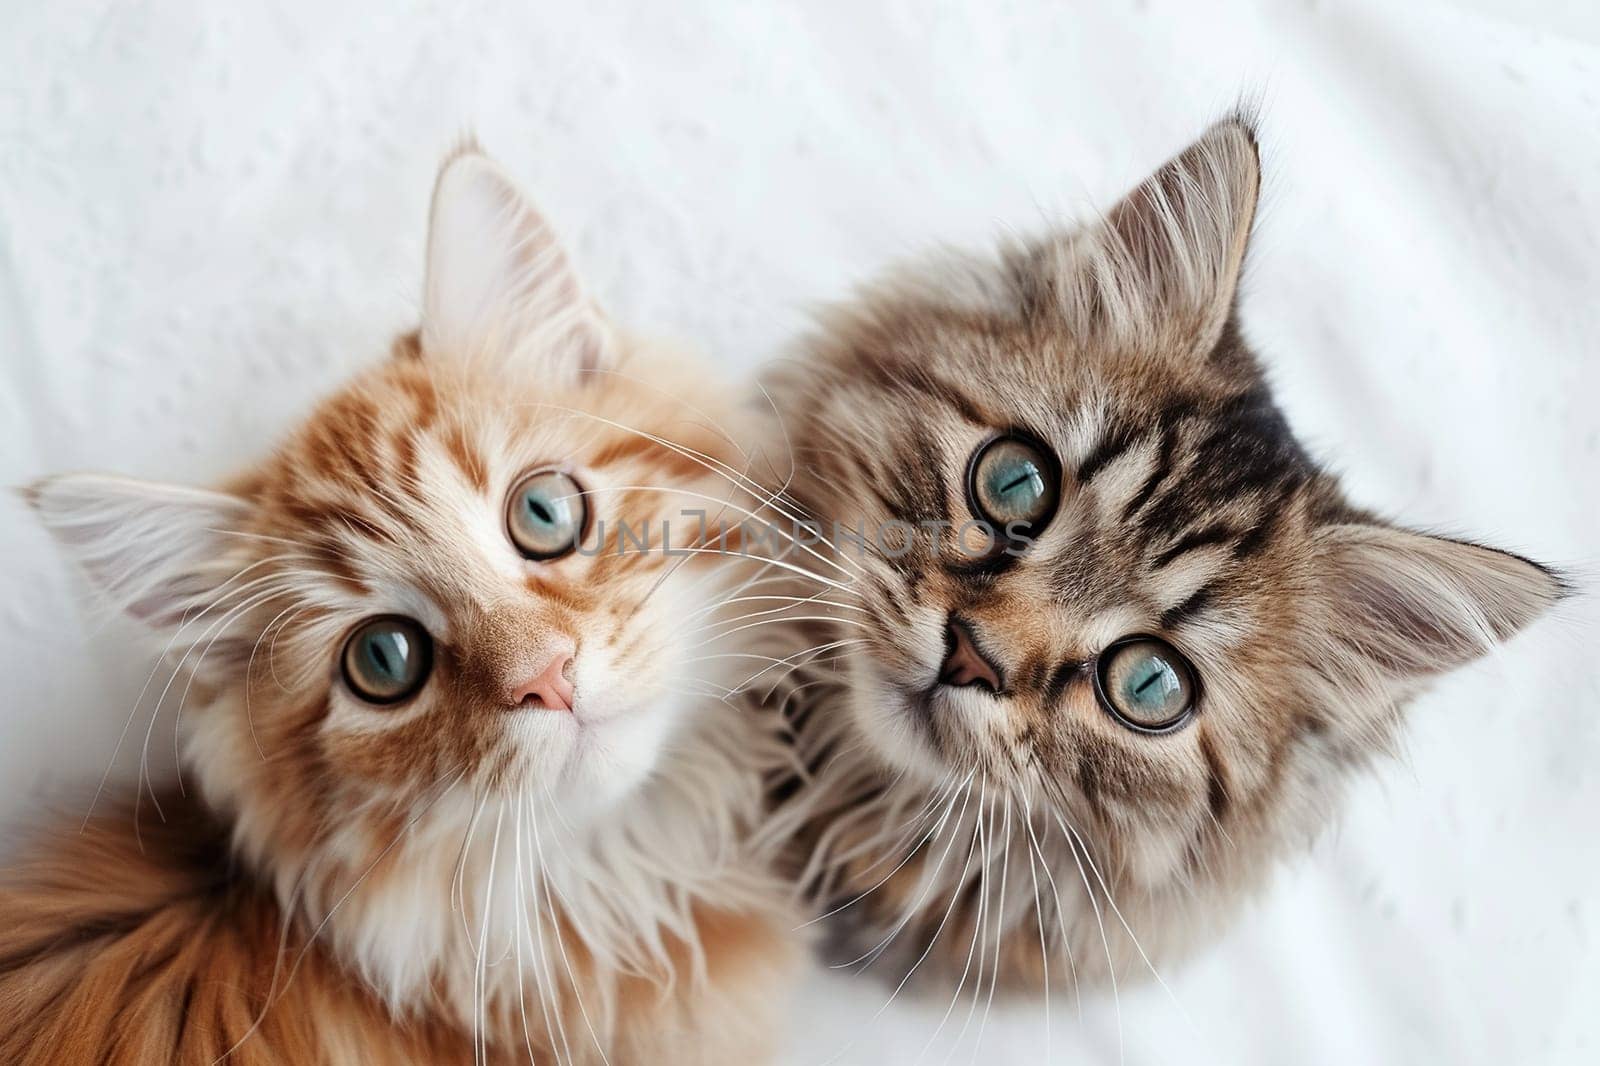 Top view of two cute tabby kittens looking at the camera. Generated by artificial intelligence by Vovmar